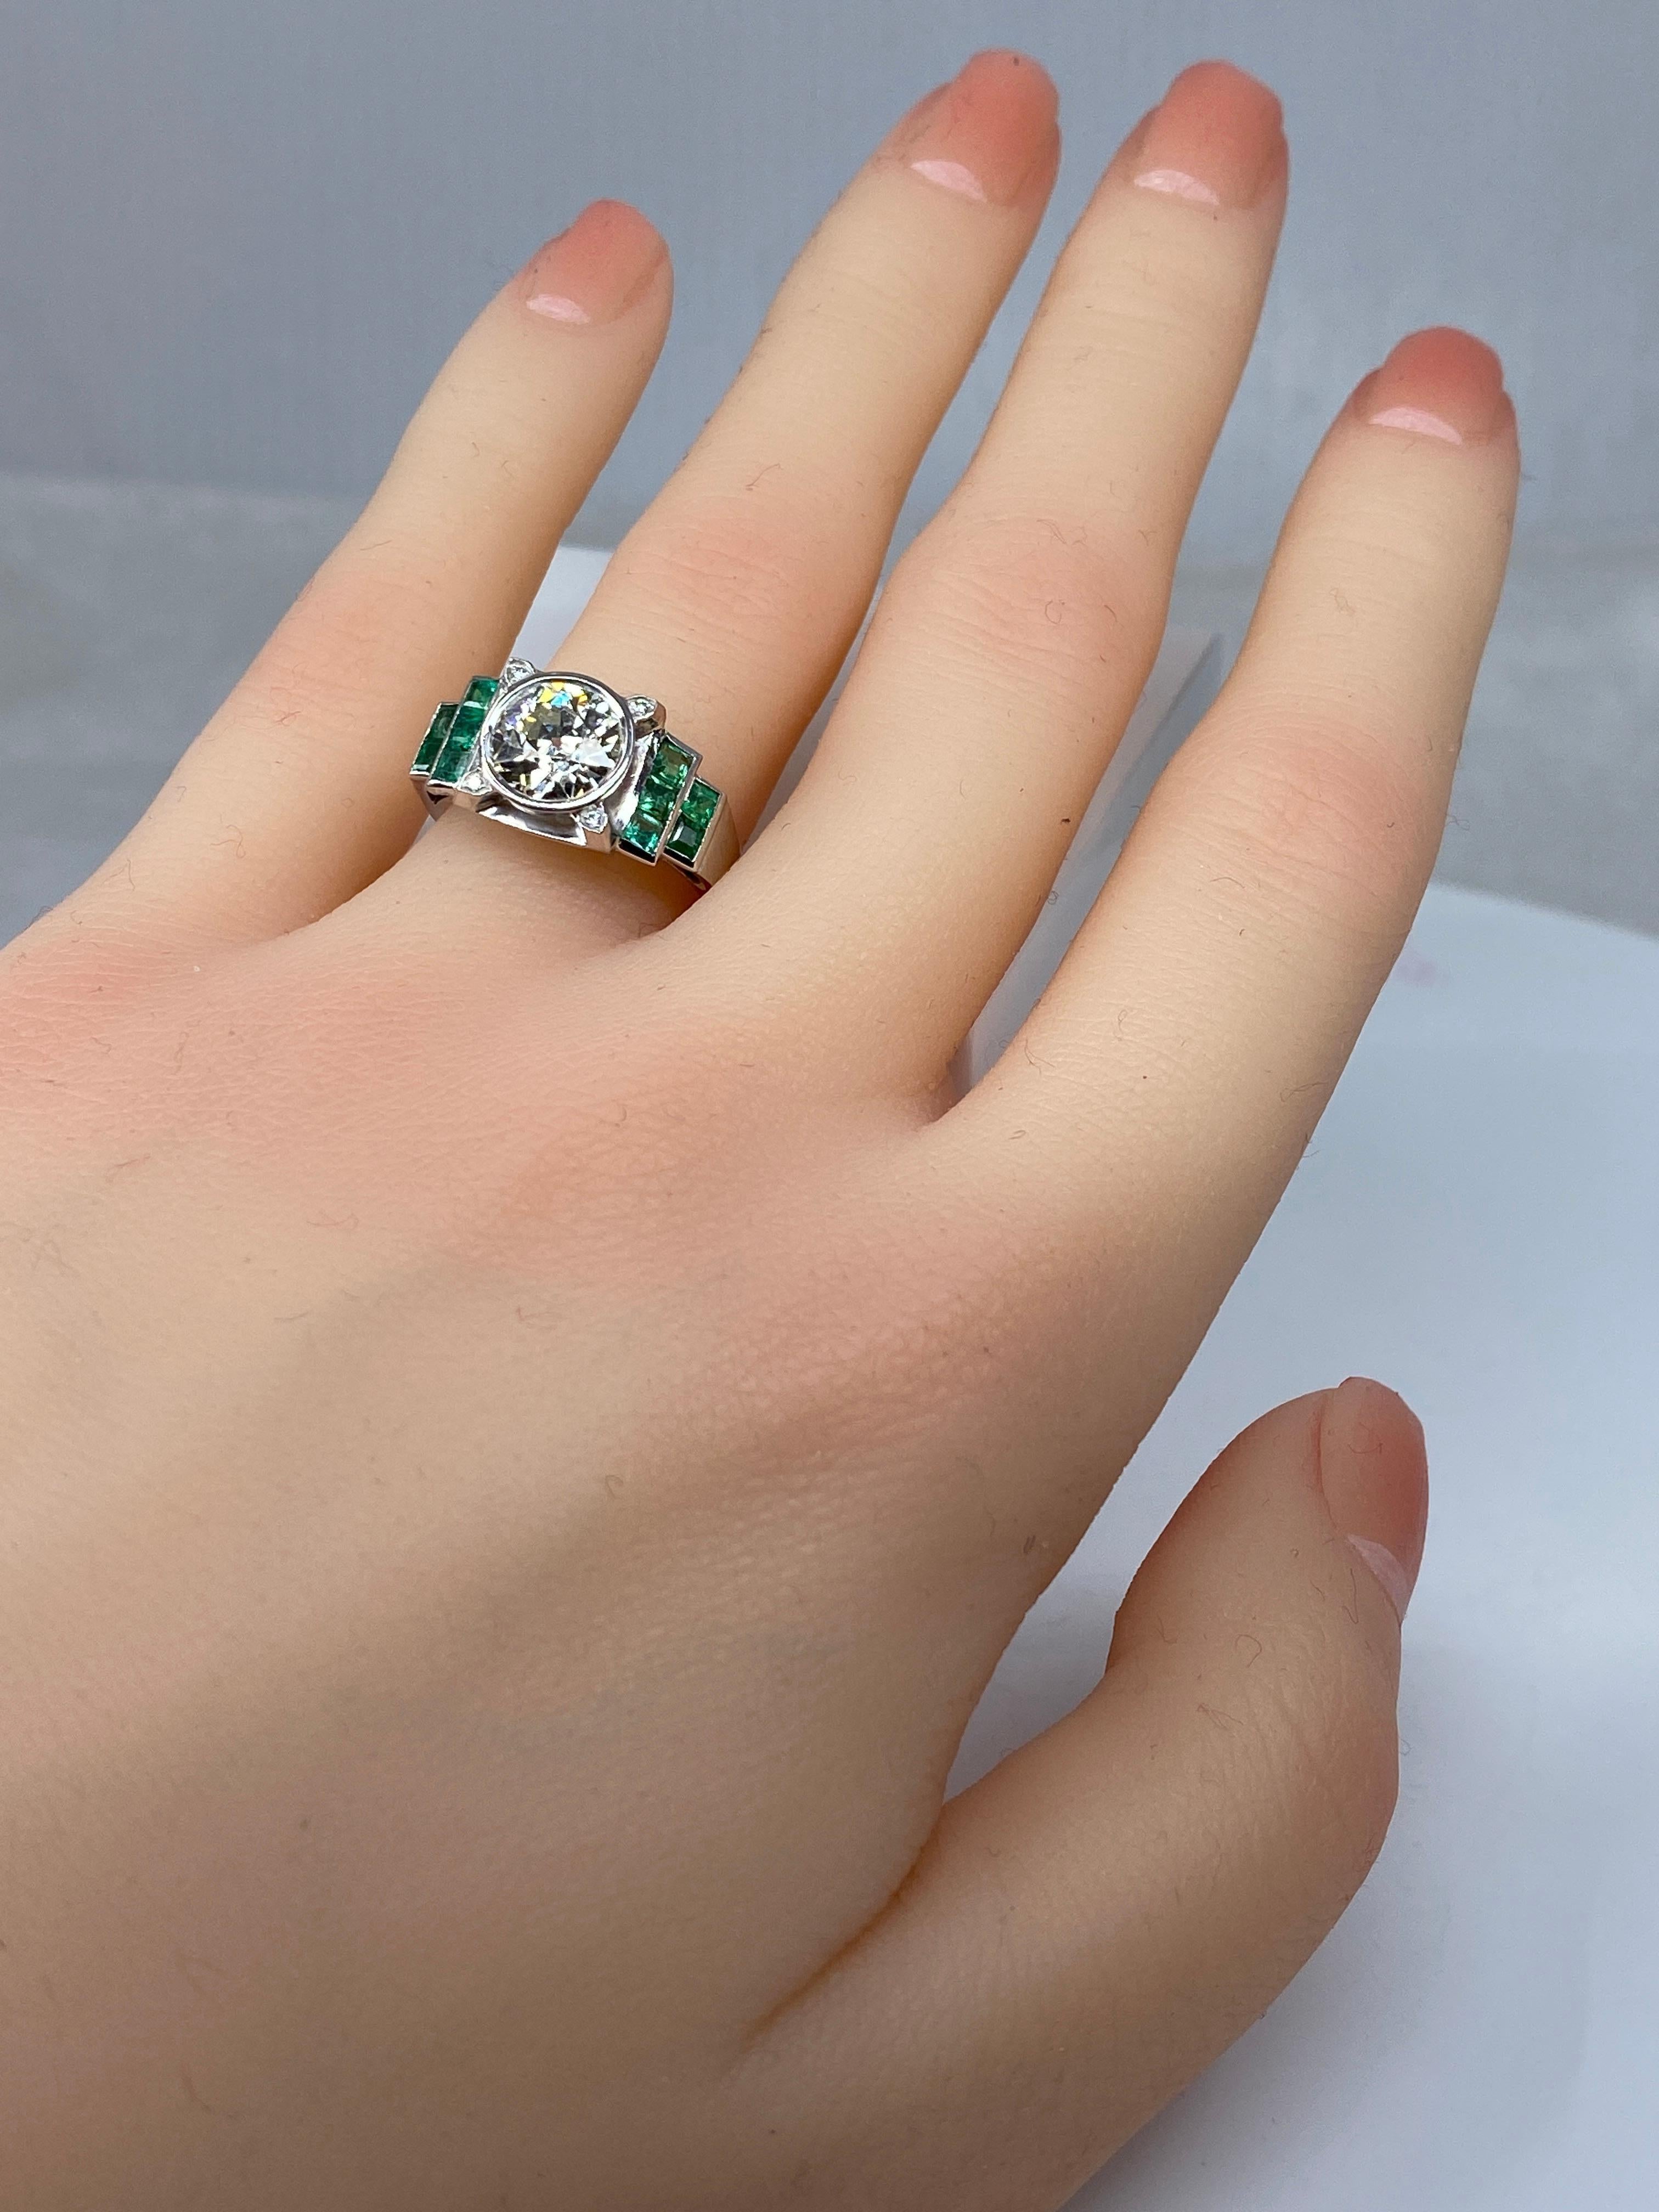 Platinium Engagement Ring Set with a 1.55 Carat Diamond Backed by Emeralds, 1900 For Sale 9